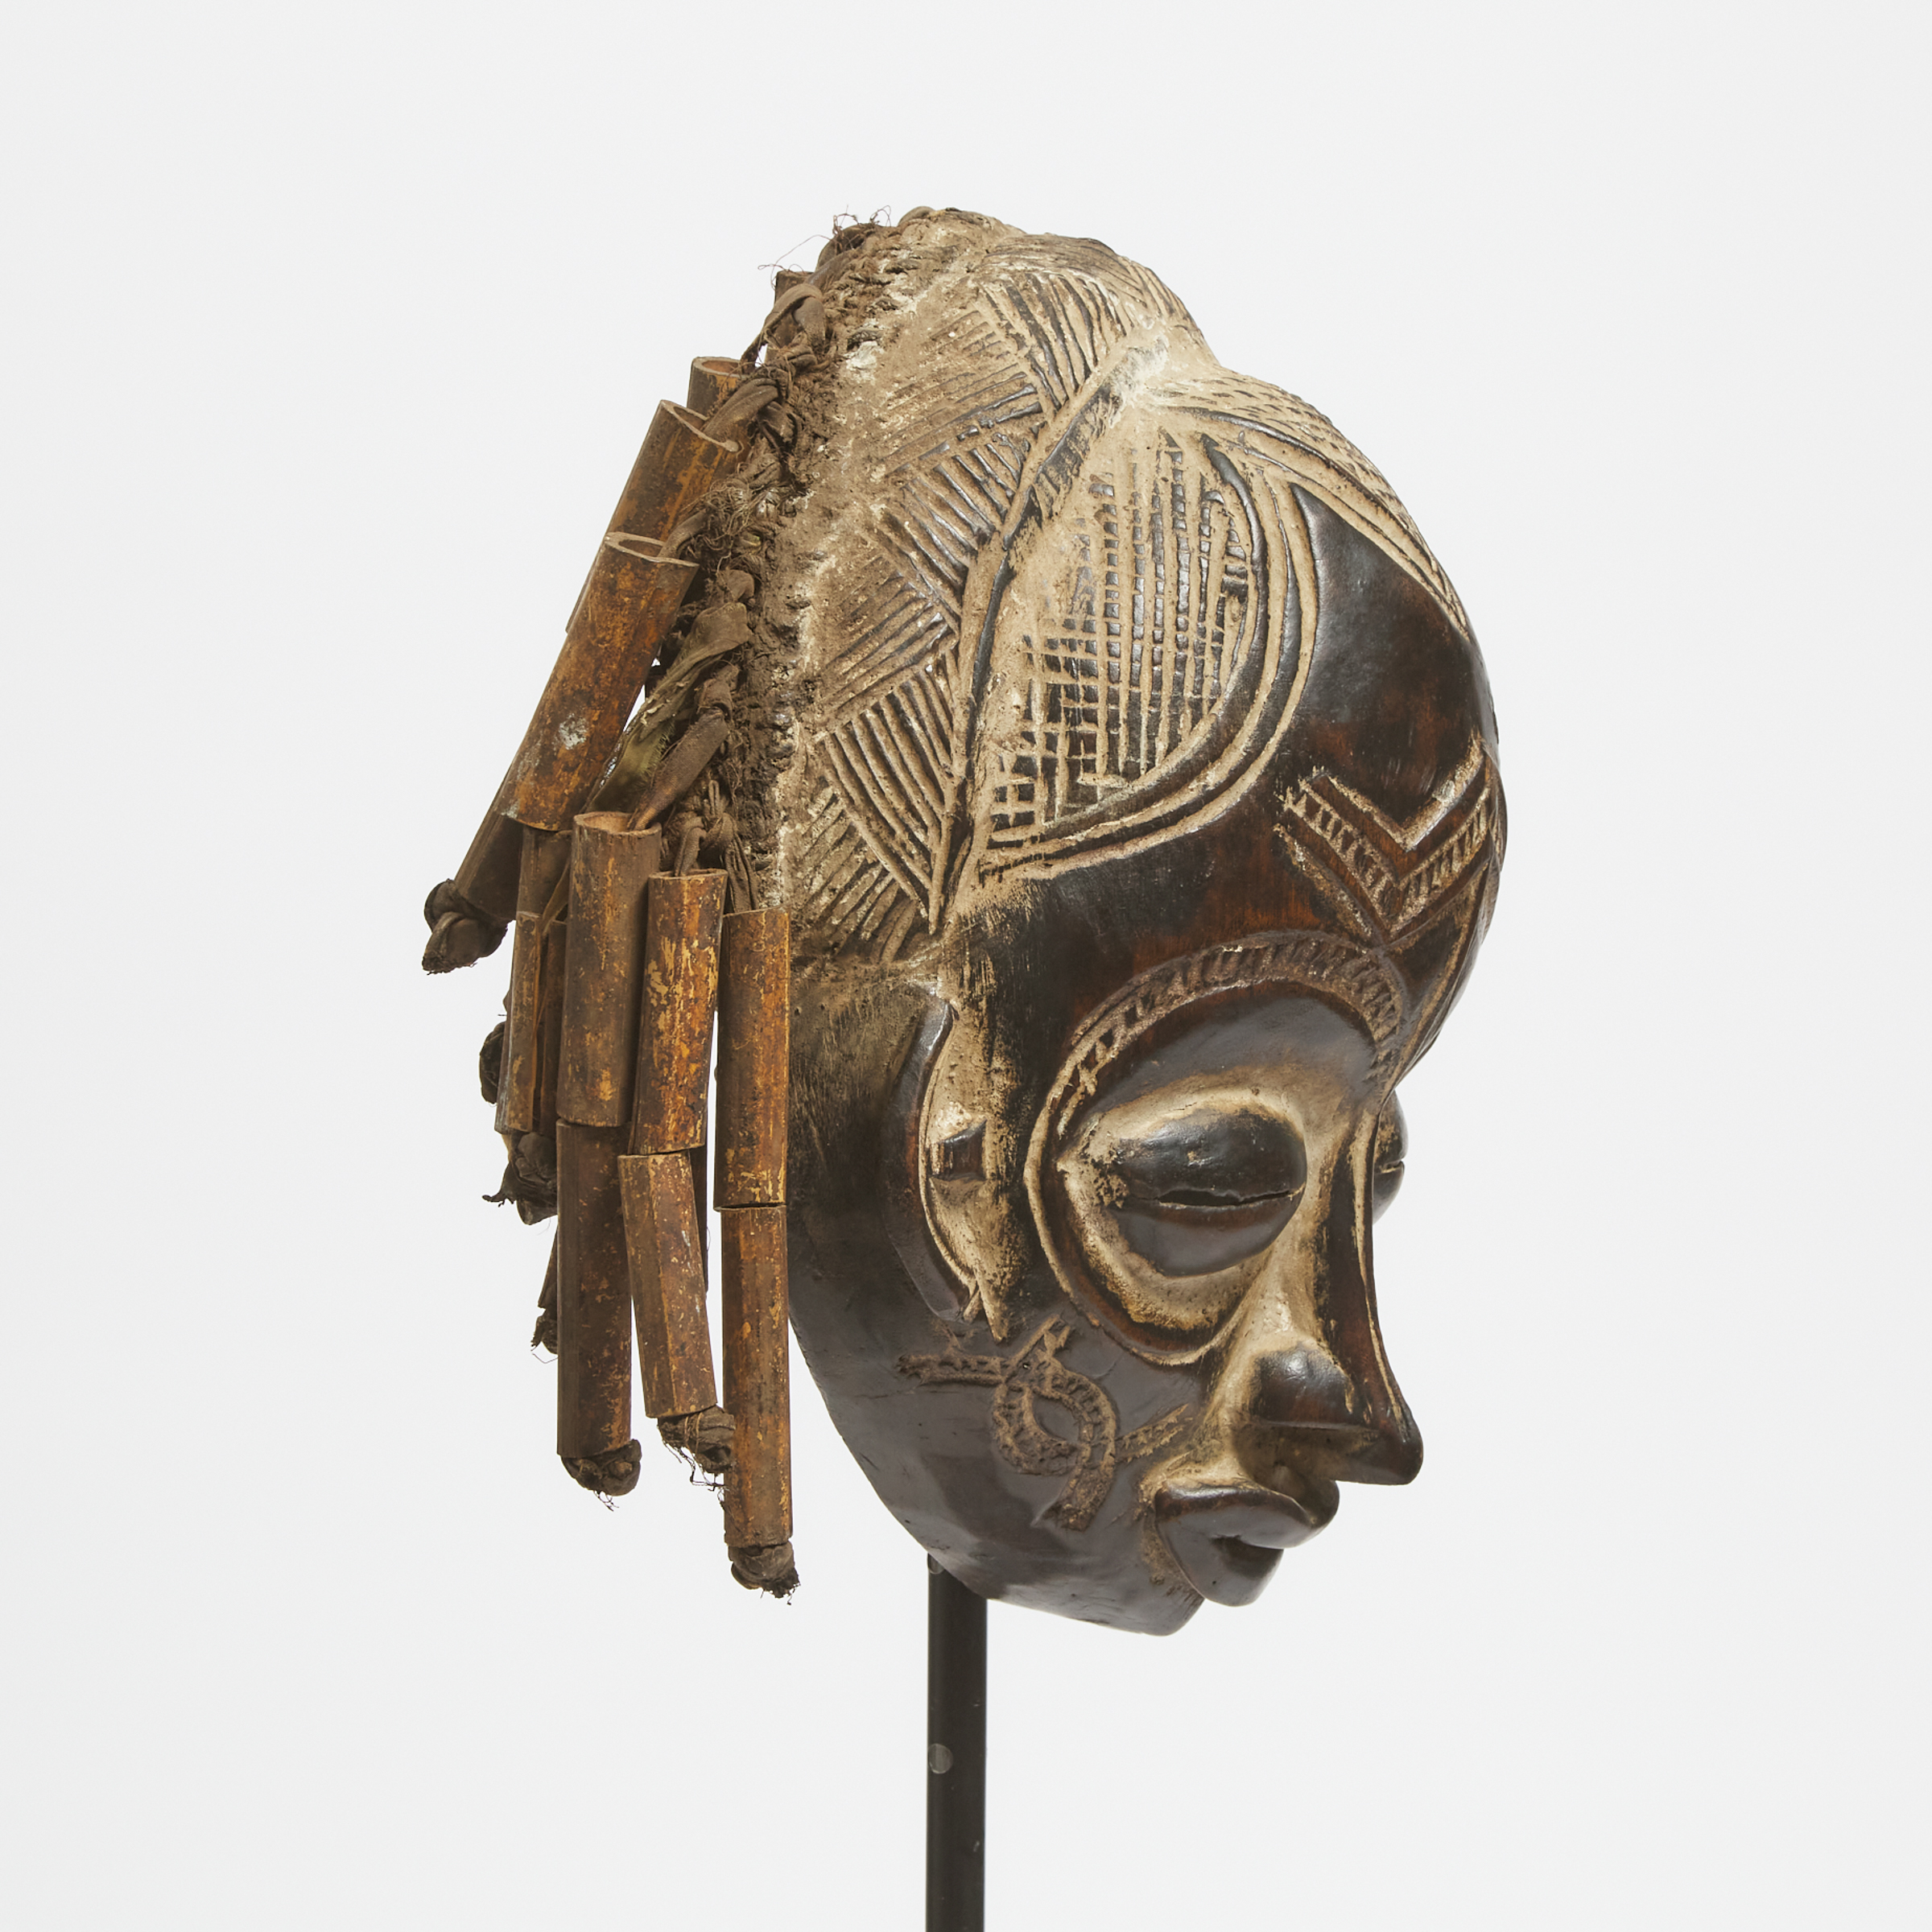 Chokwe Mask, Central Africa, late 20th century